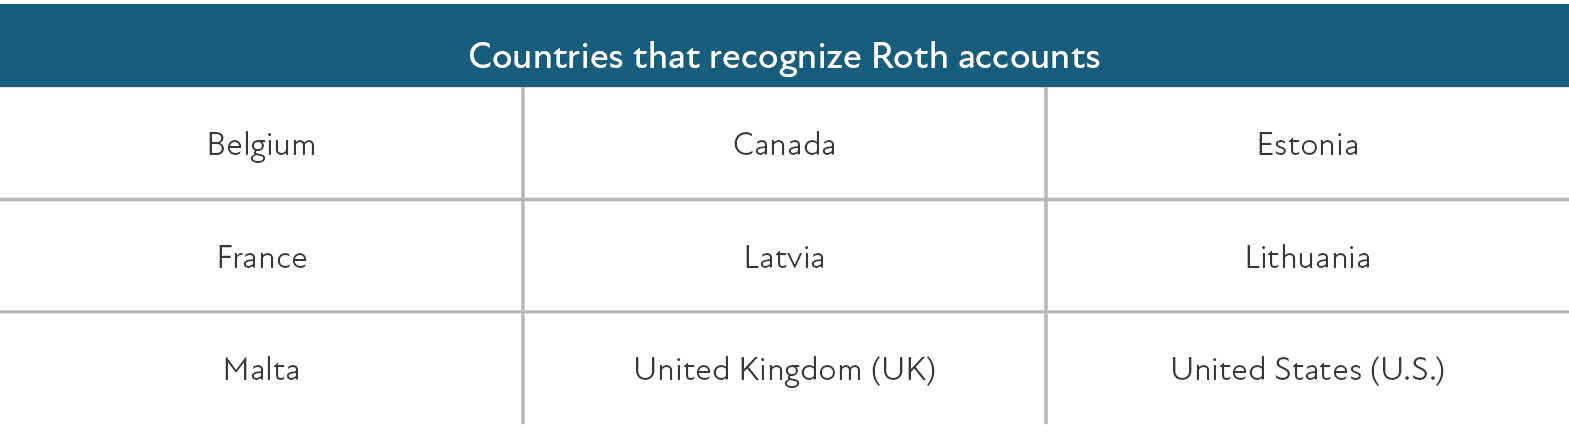 Countries-That-Recognize-Roth-Accounts